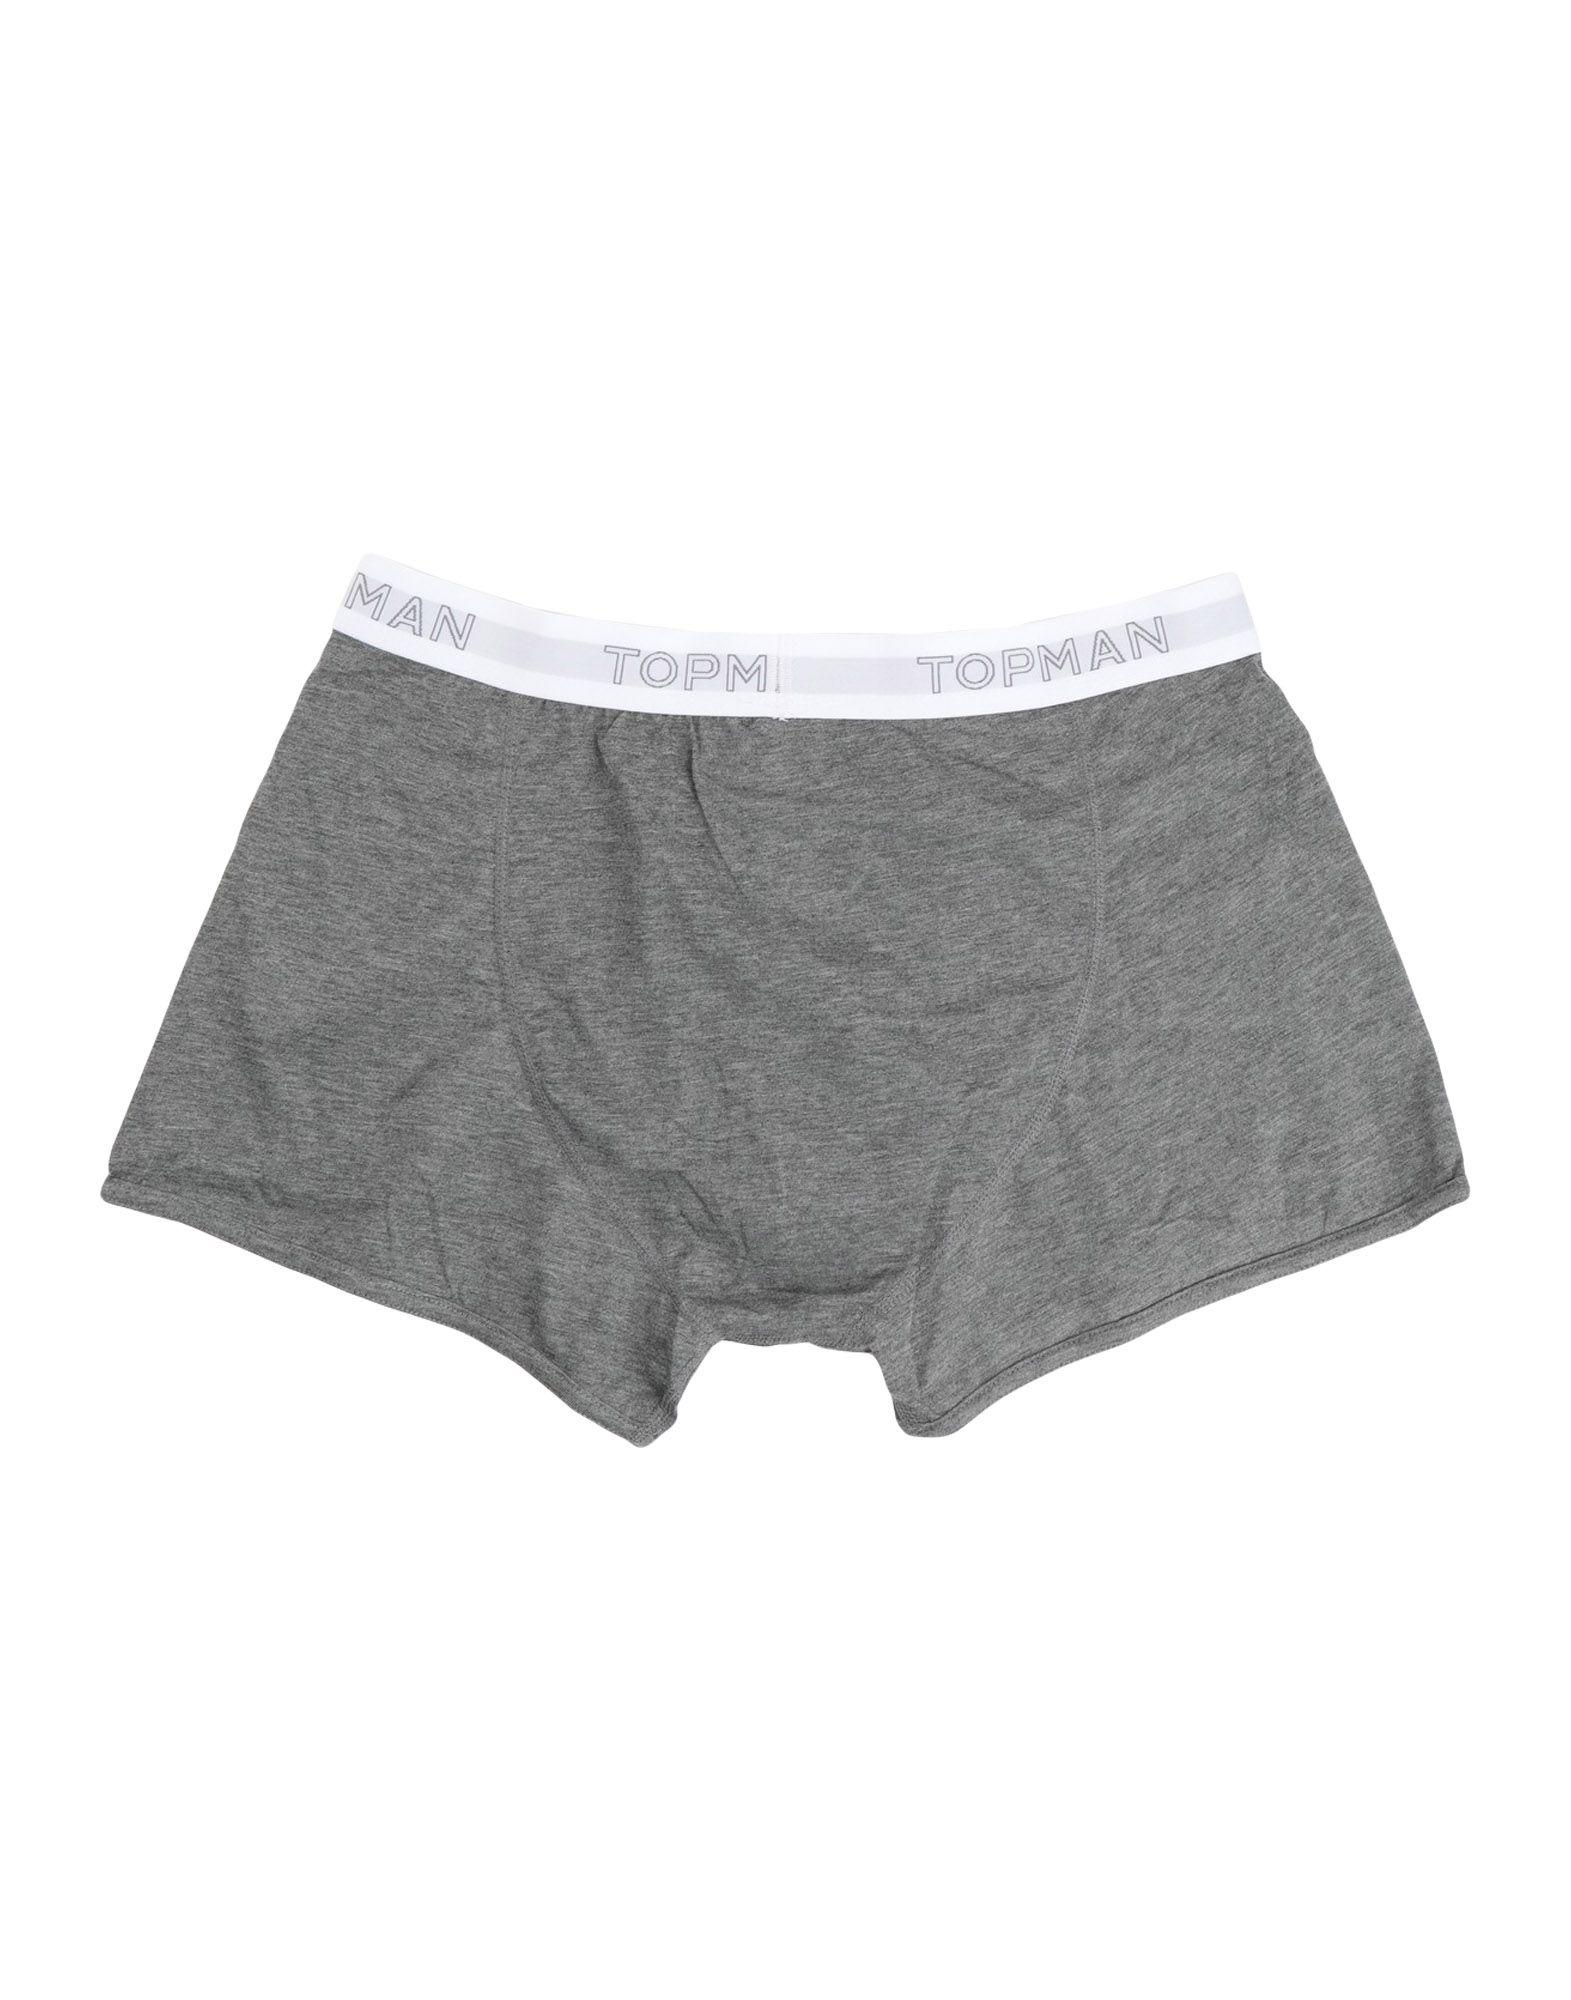 TOPMAN Synthetic Boxer in Grey (Gray) for Men - Lyst